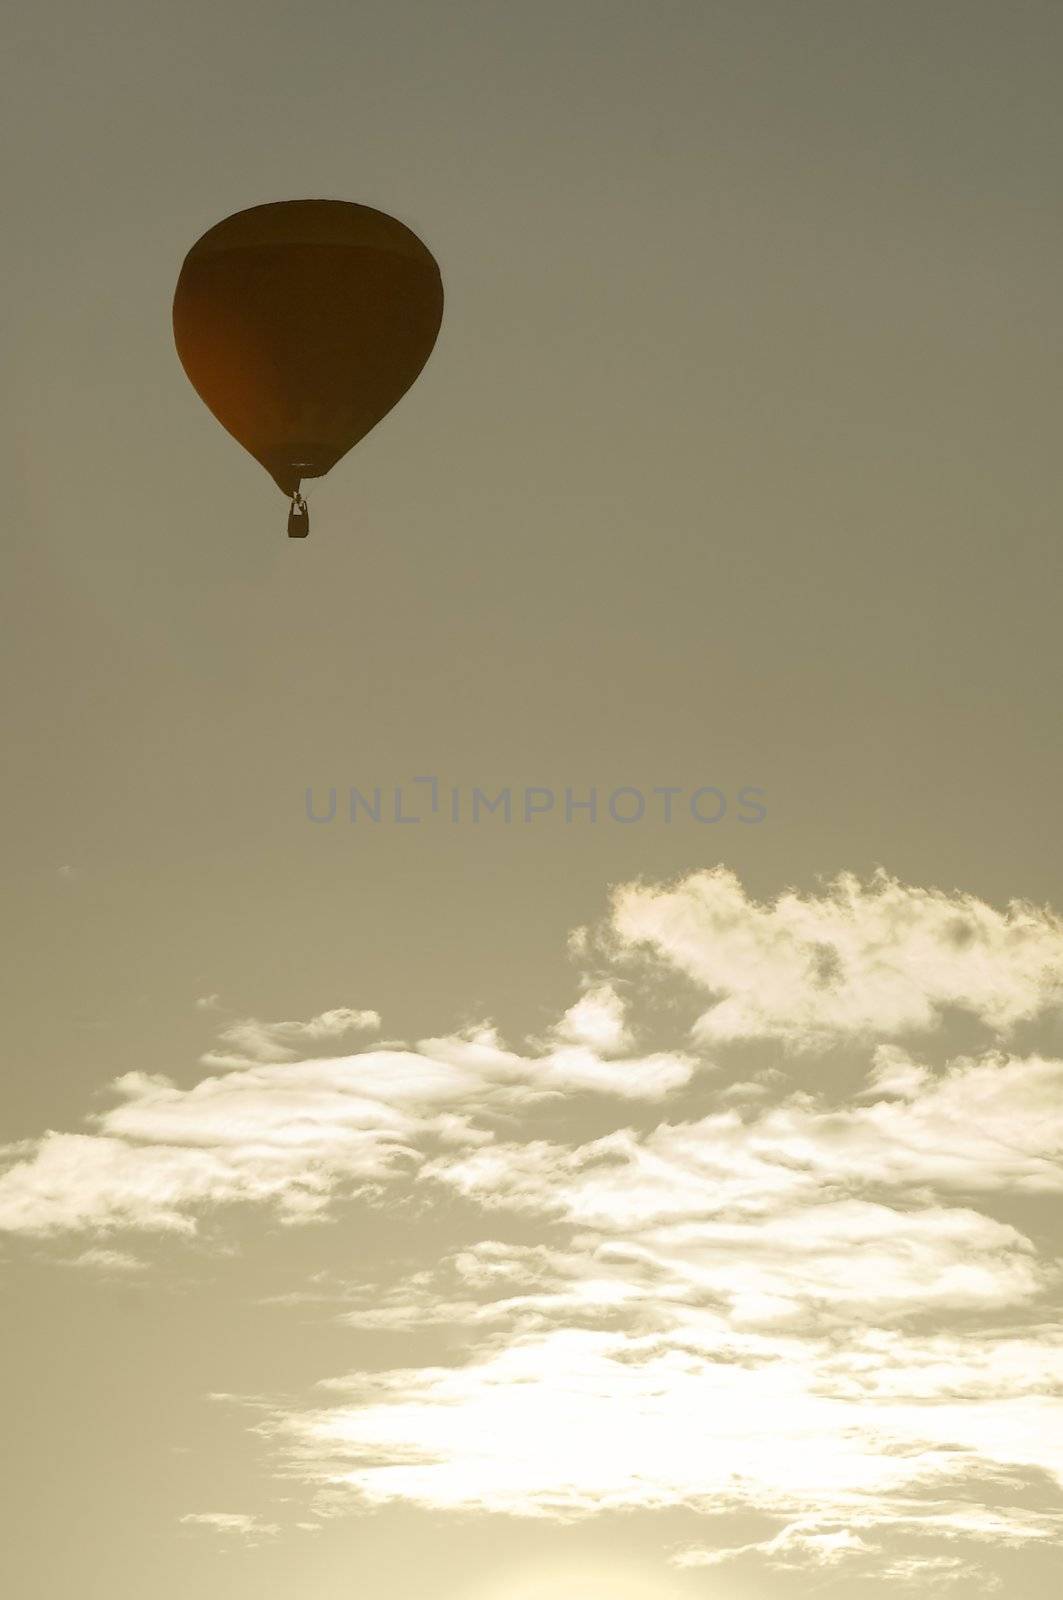 red balloon silhouette on grey sky with clouds